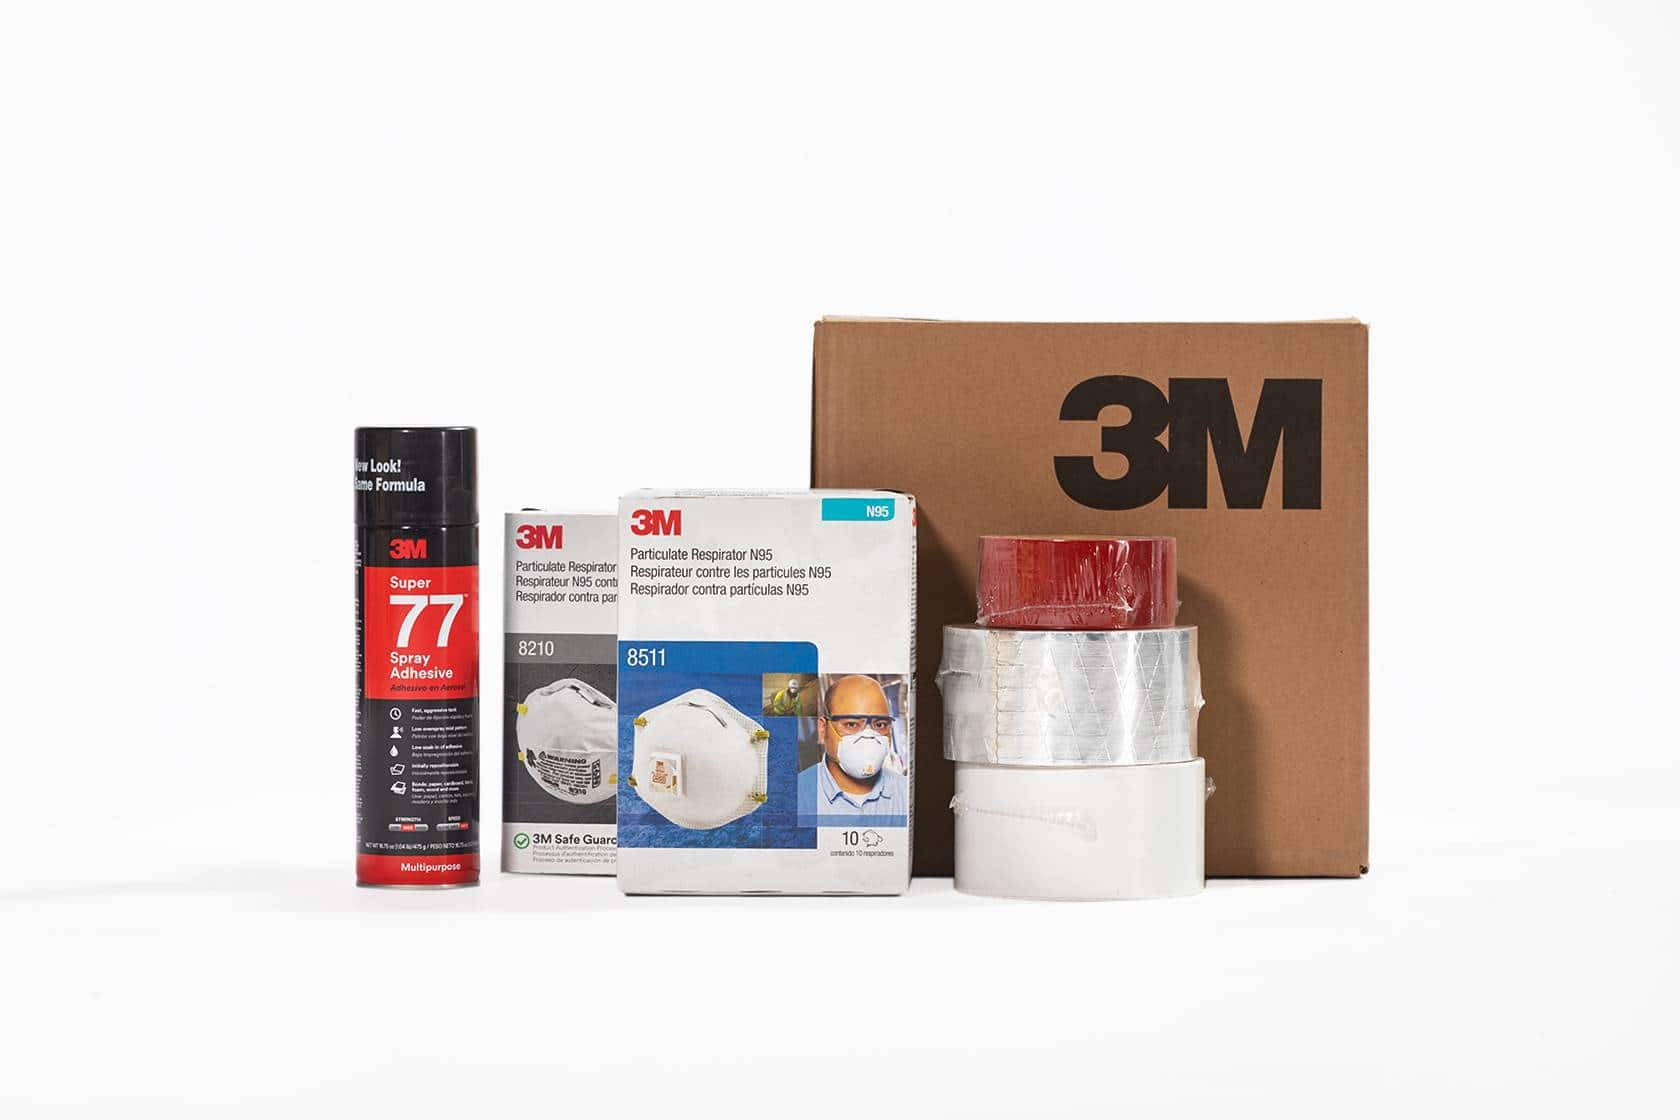 3M Product Layout